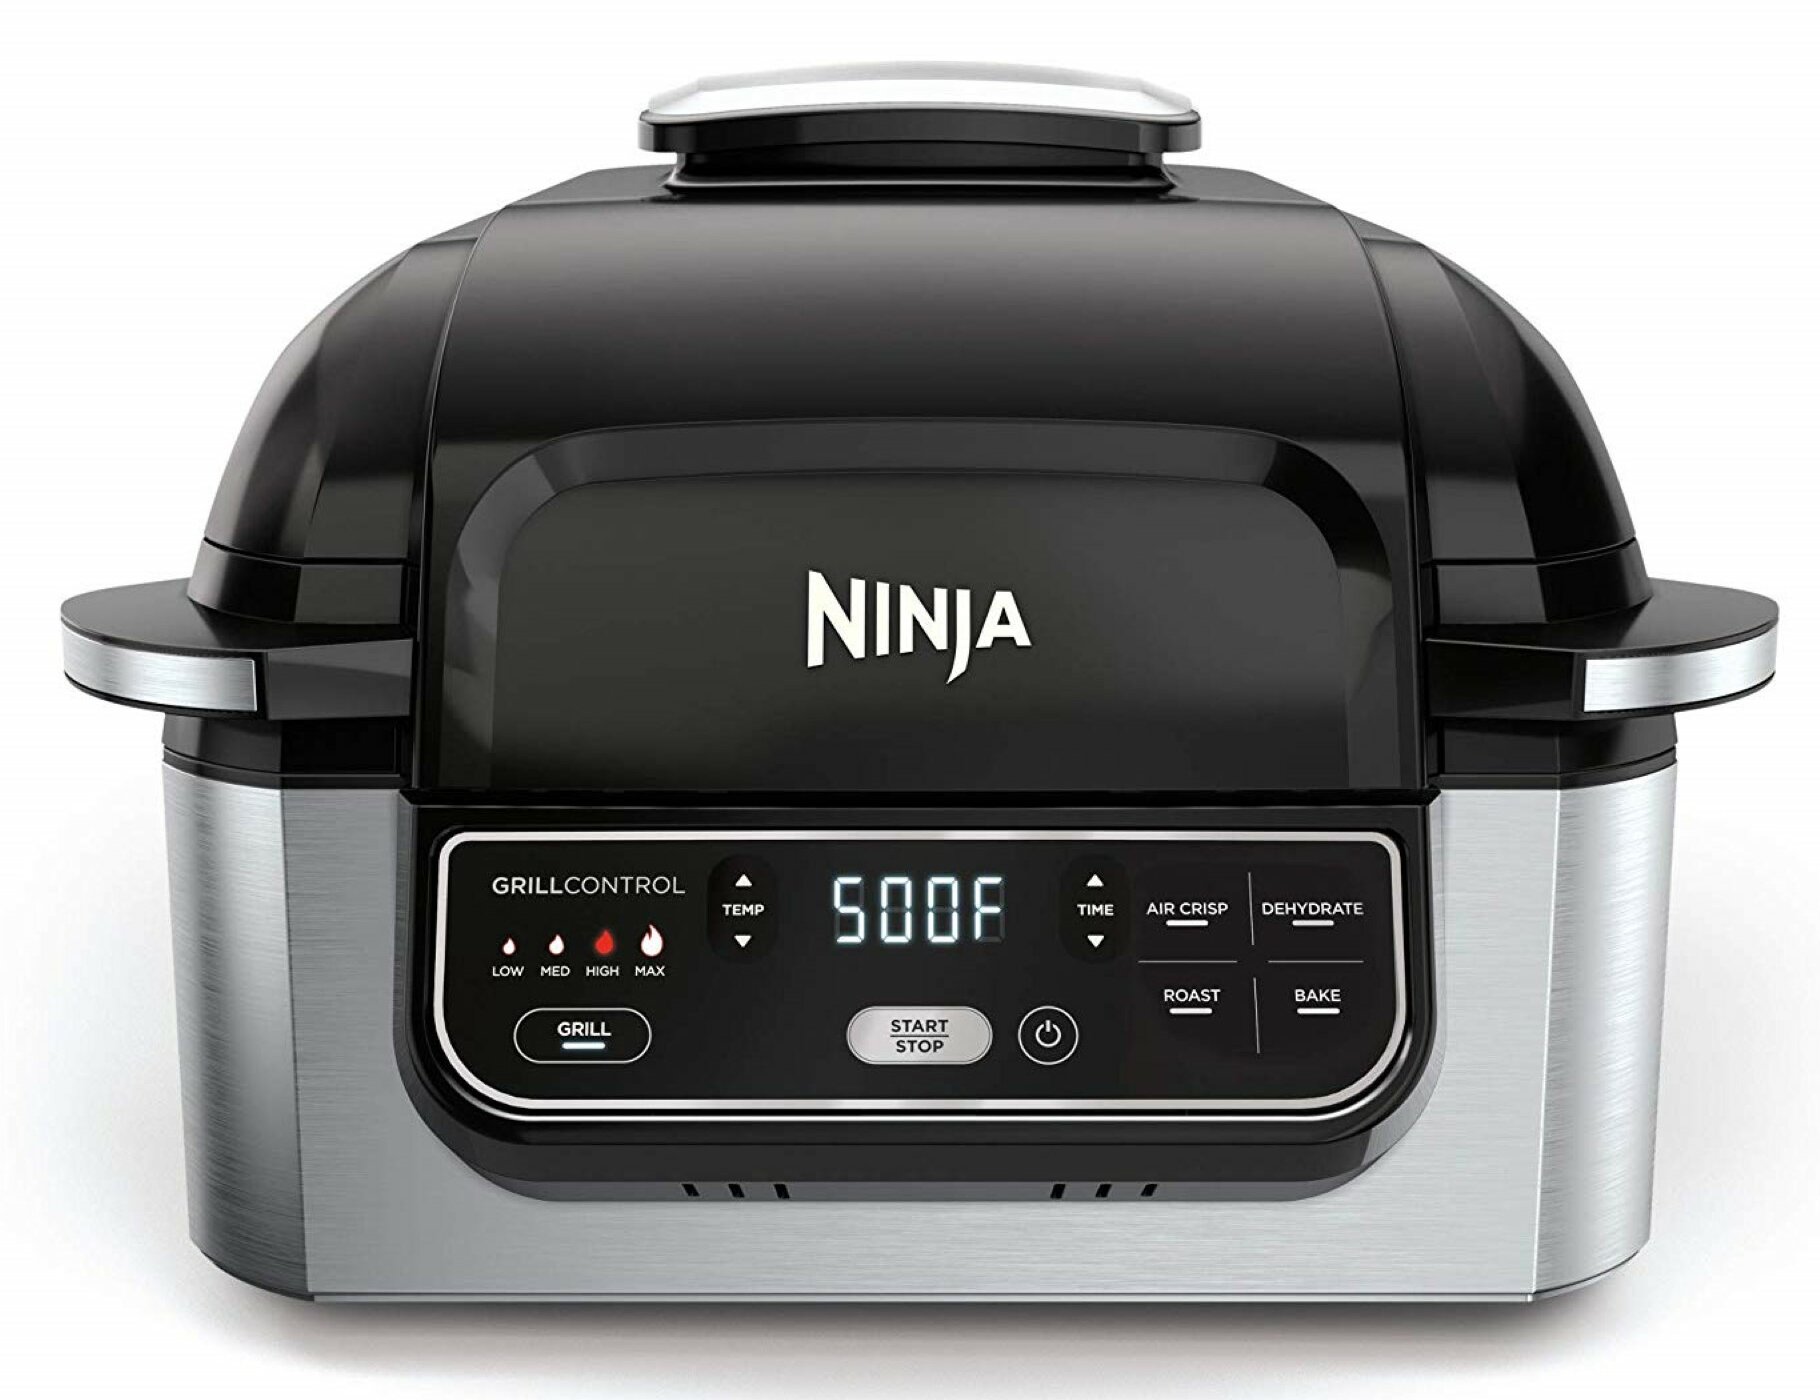 Ninja Combi Multicooker How To Cook French Fries in Air Fryer I Love This  Air Fryer! 